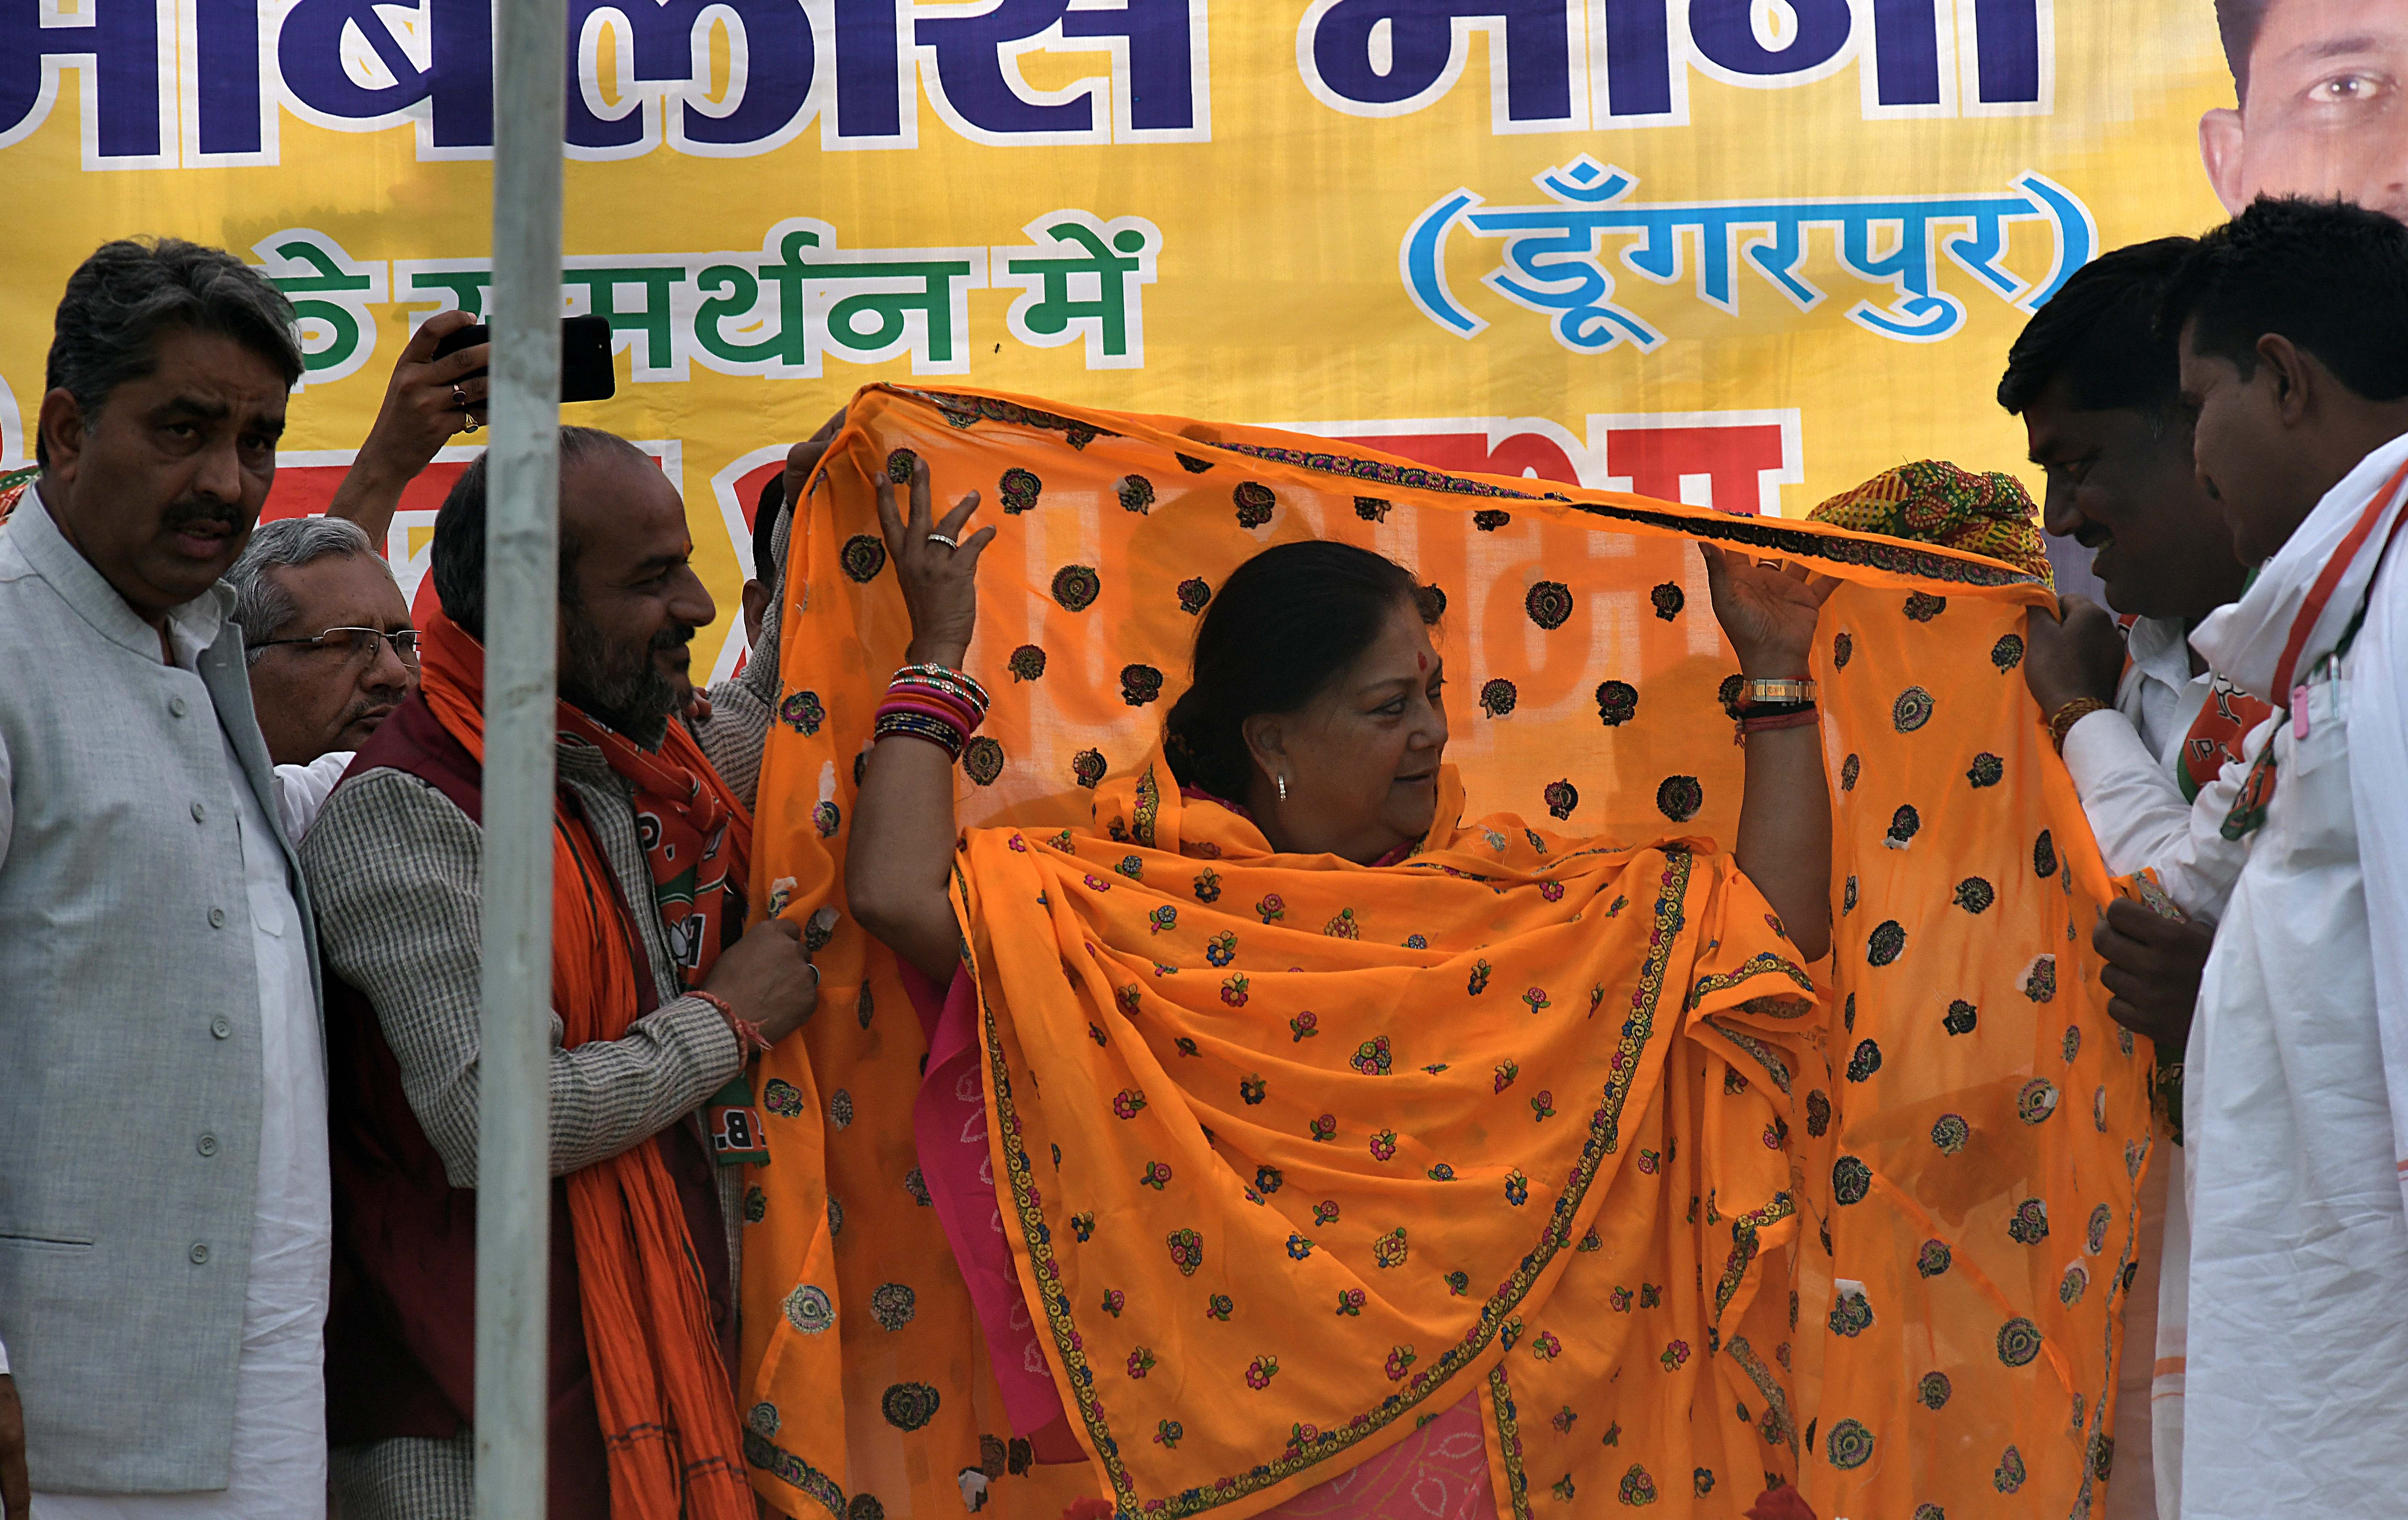 Even in her campaign rally by home minister Rajnath Singh in Jhalrapatan, Raje was absent, but her supporters were showing her 'kundali' and suggesting that she would win. (Photo by Suman Sarkar)